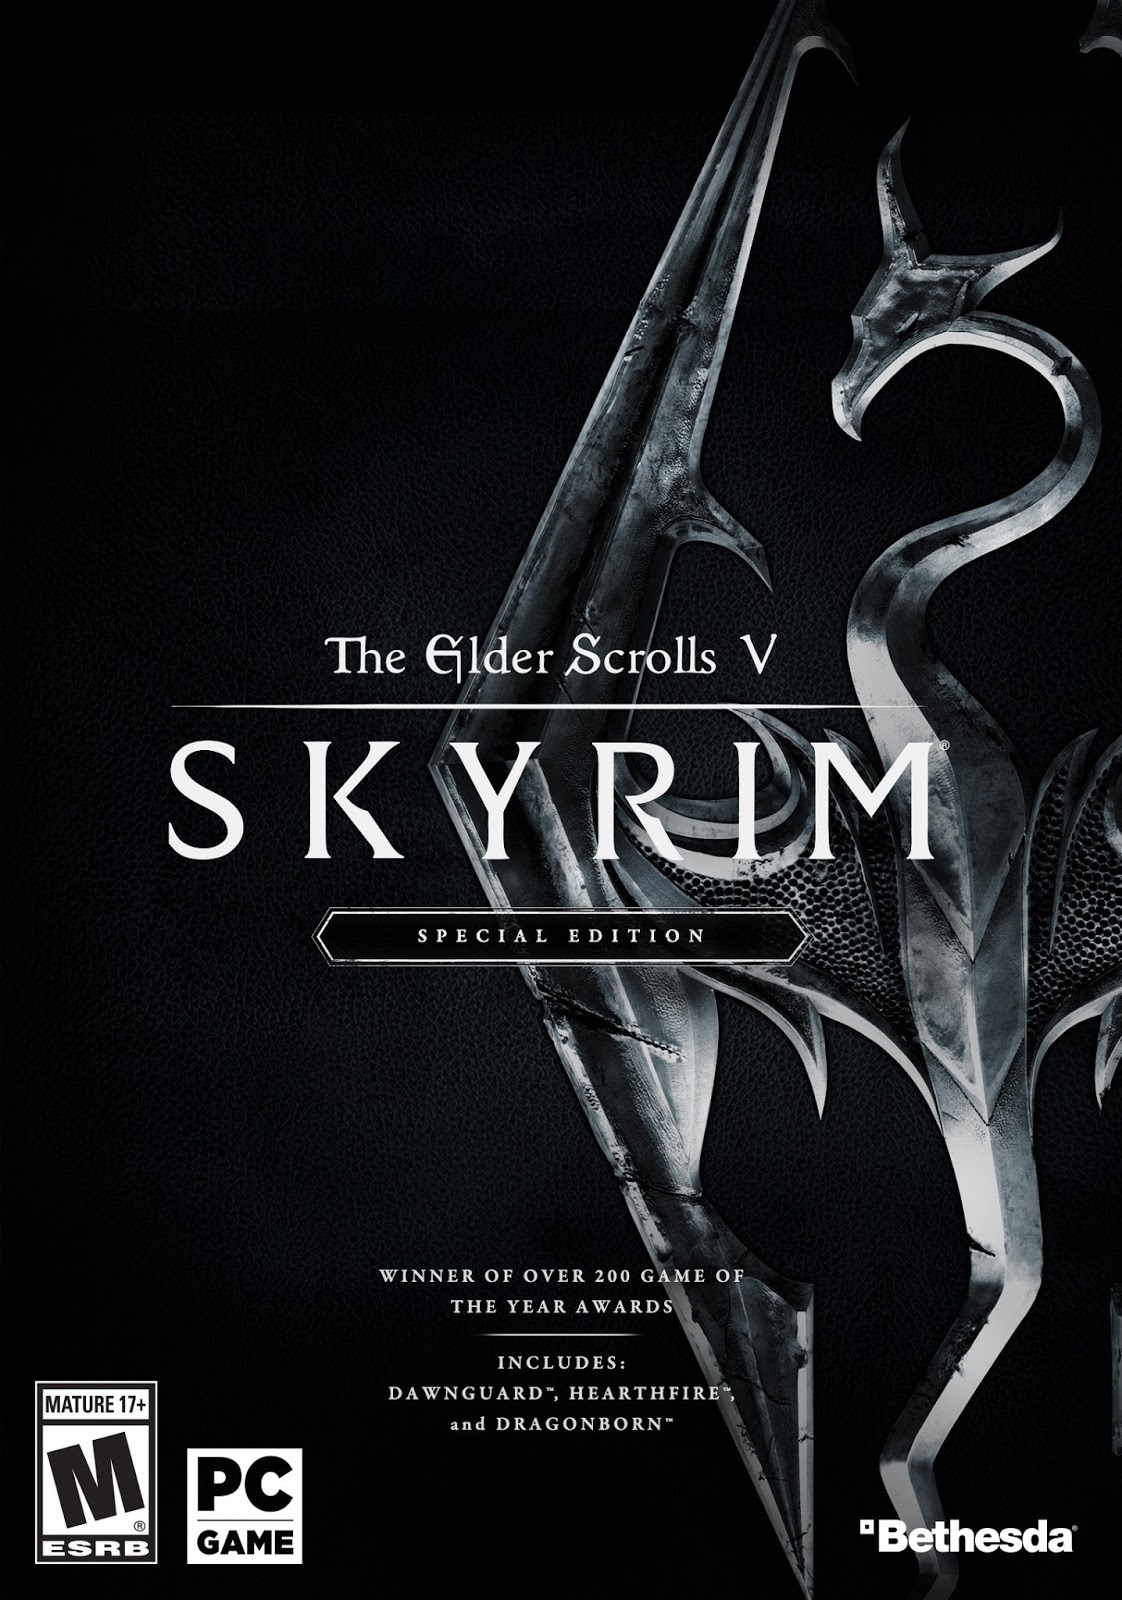 The Elder Scrolls V Skyrim Special Edition Download PC Game Full Free 